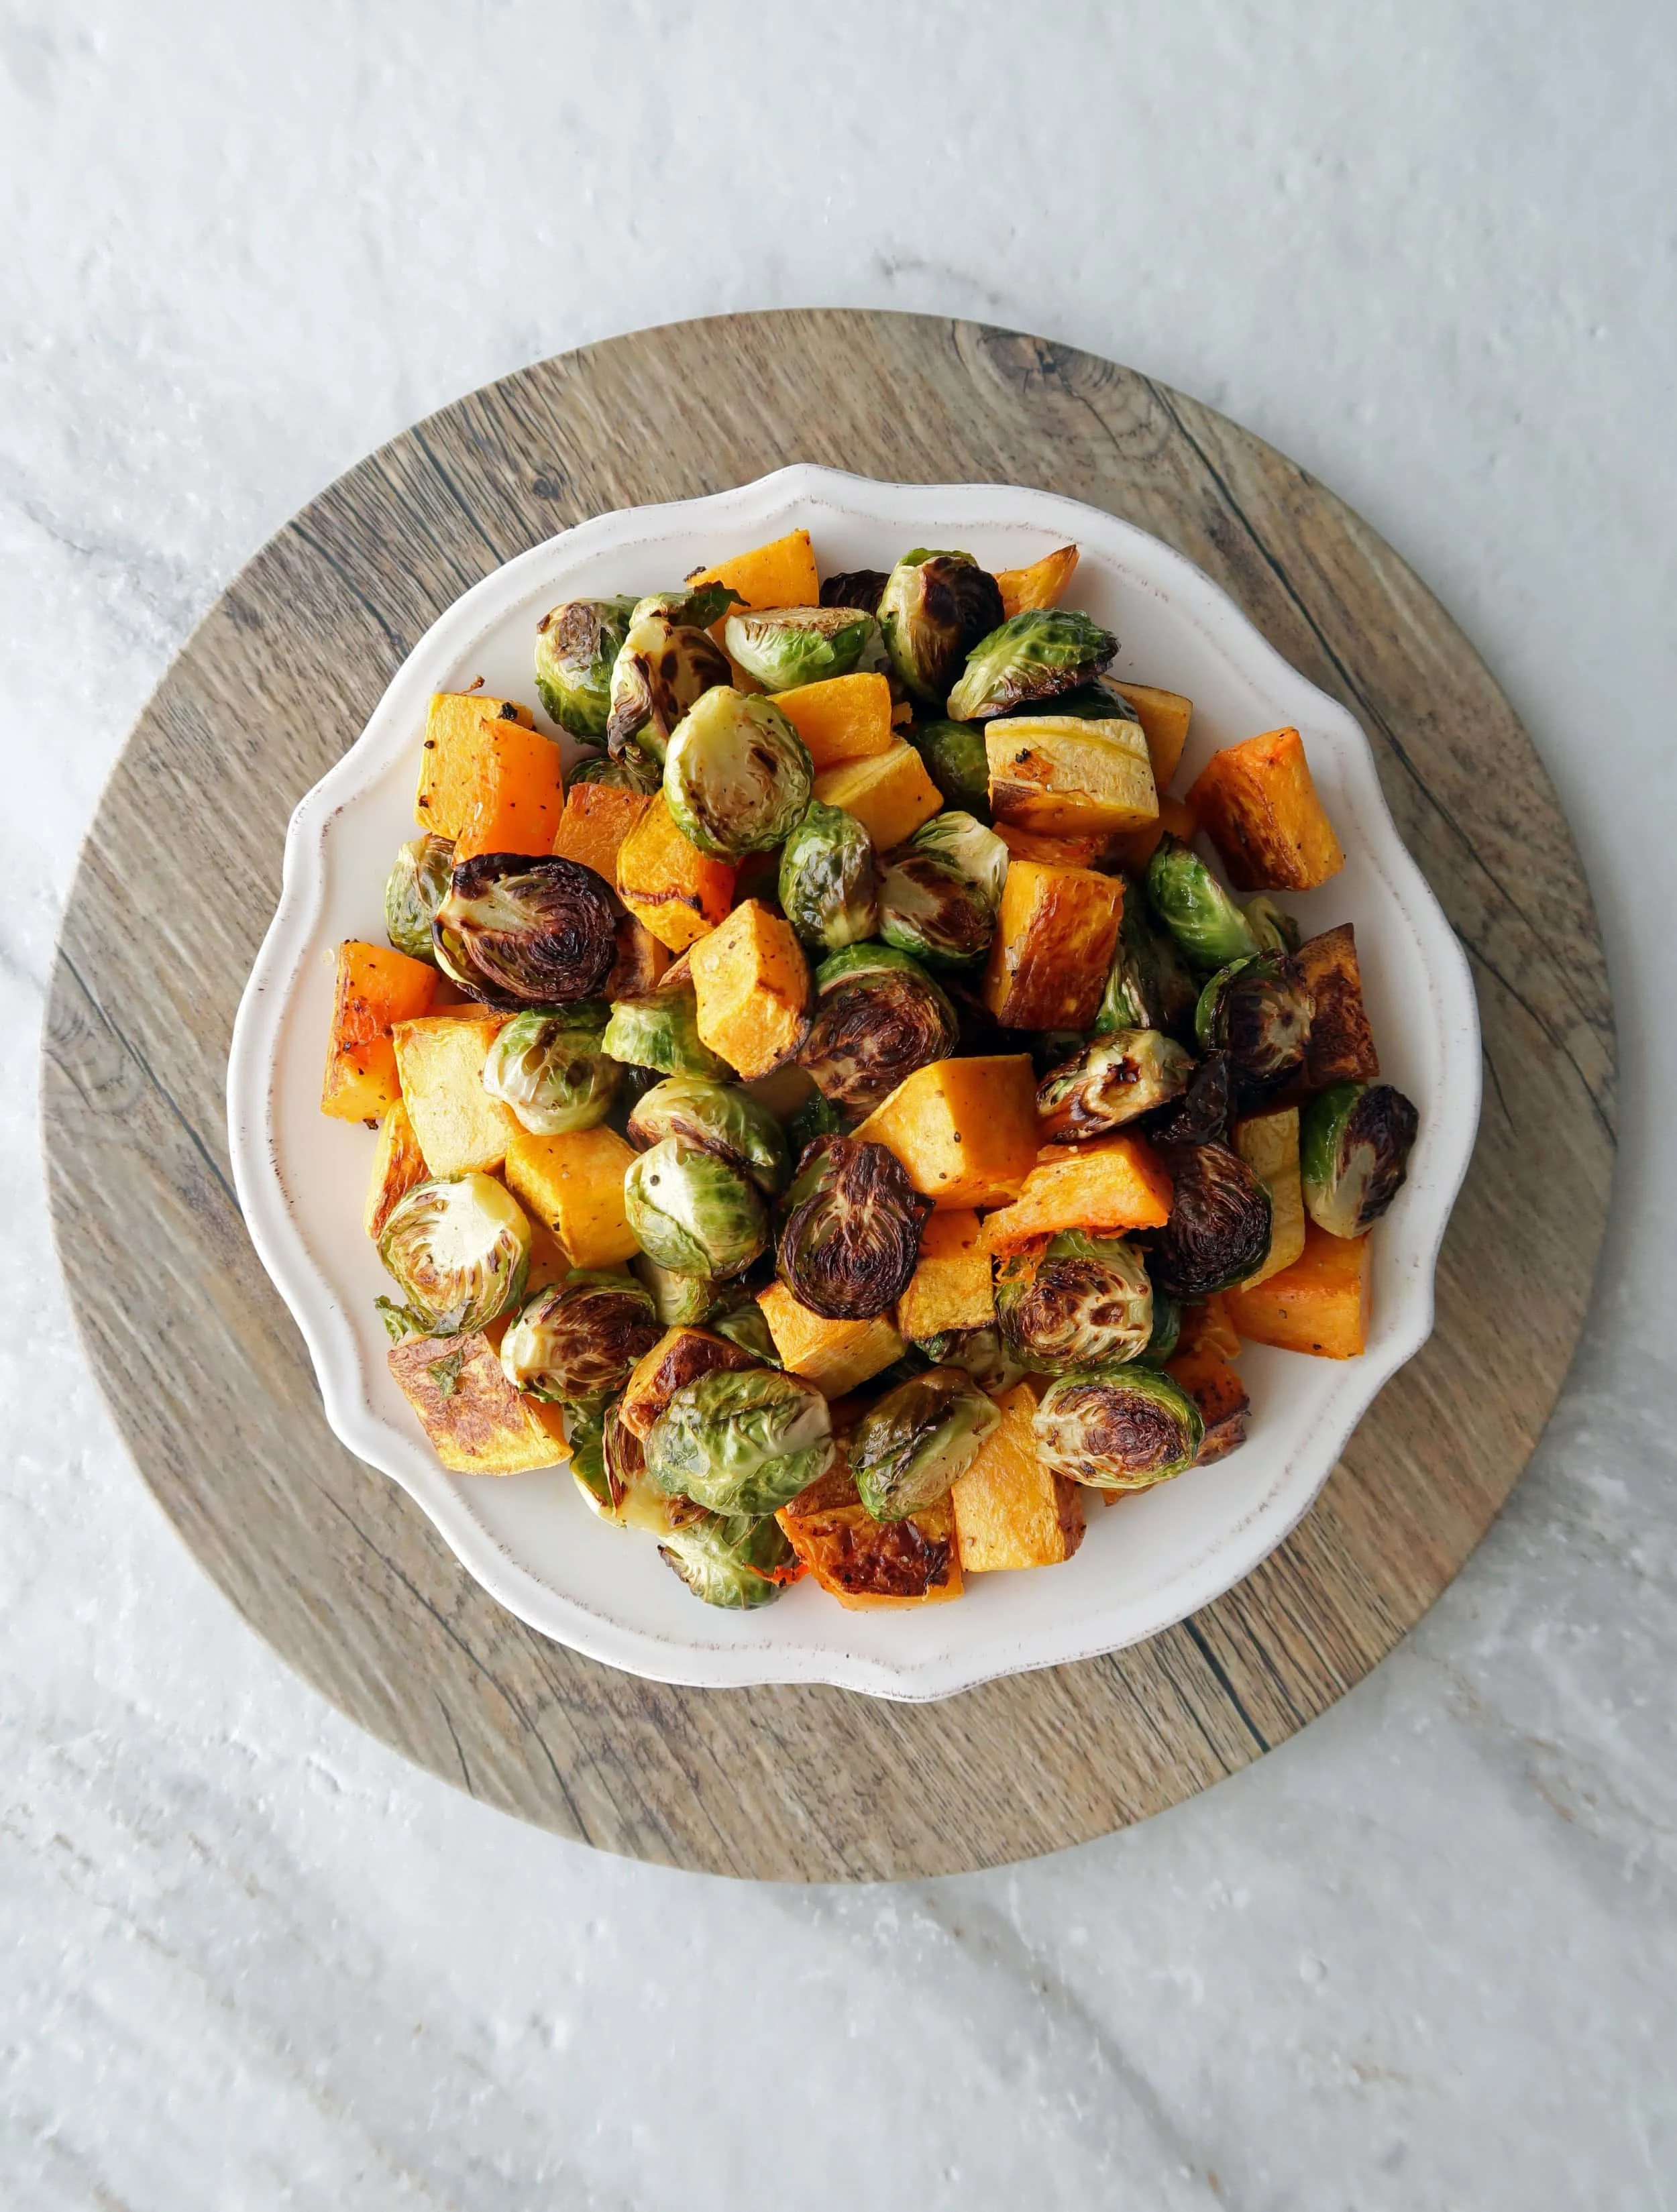 Roasted butternut squash and Brussels sprouts on a white plate.